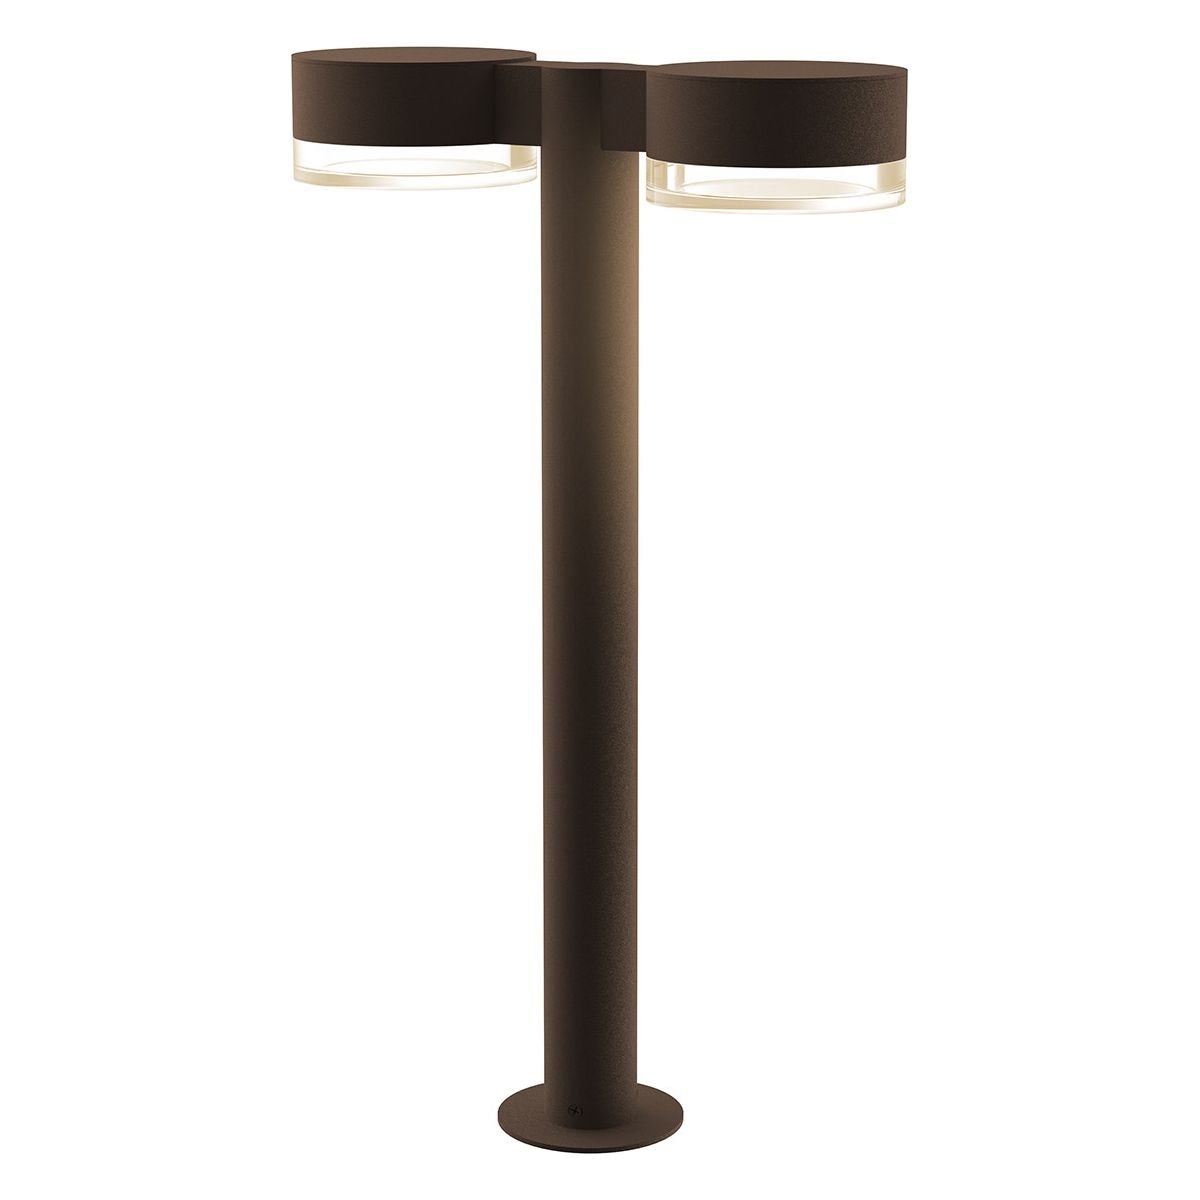 REALS 22" LED Double Bollard with Plate Cap and Cylinder Lens